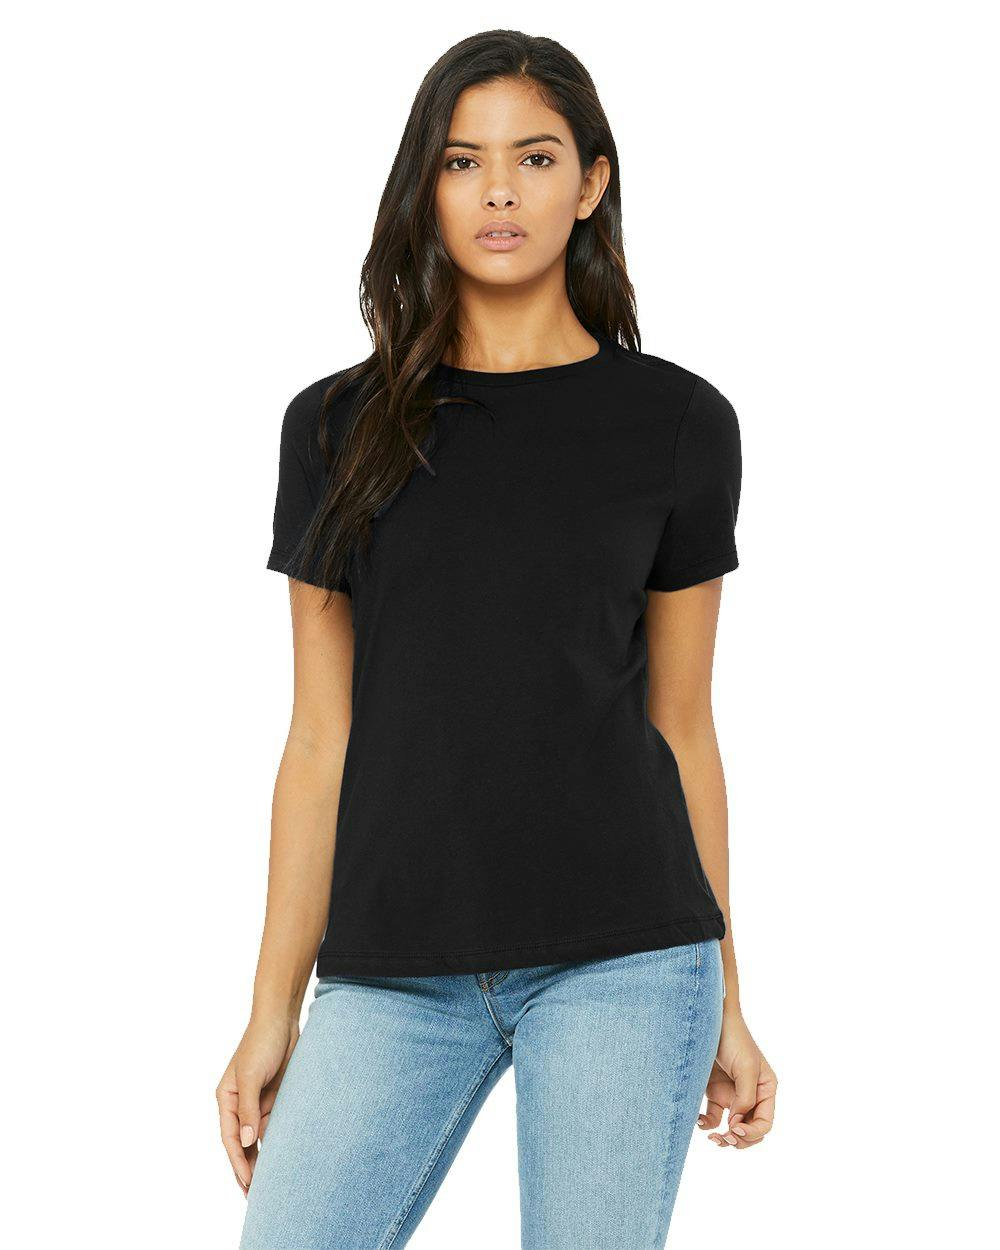 Image for Women’s Relaxed Jersey Tee - 6400